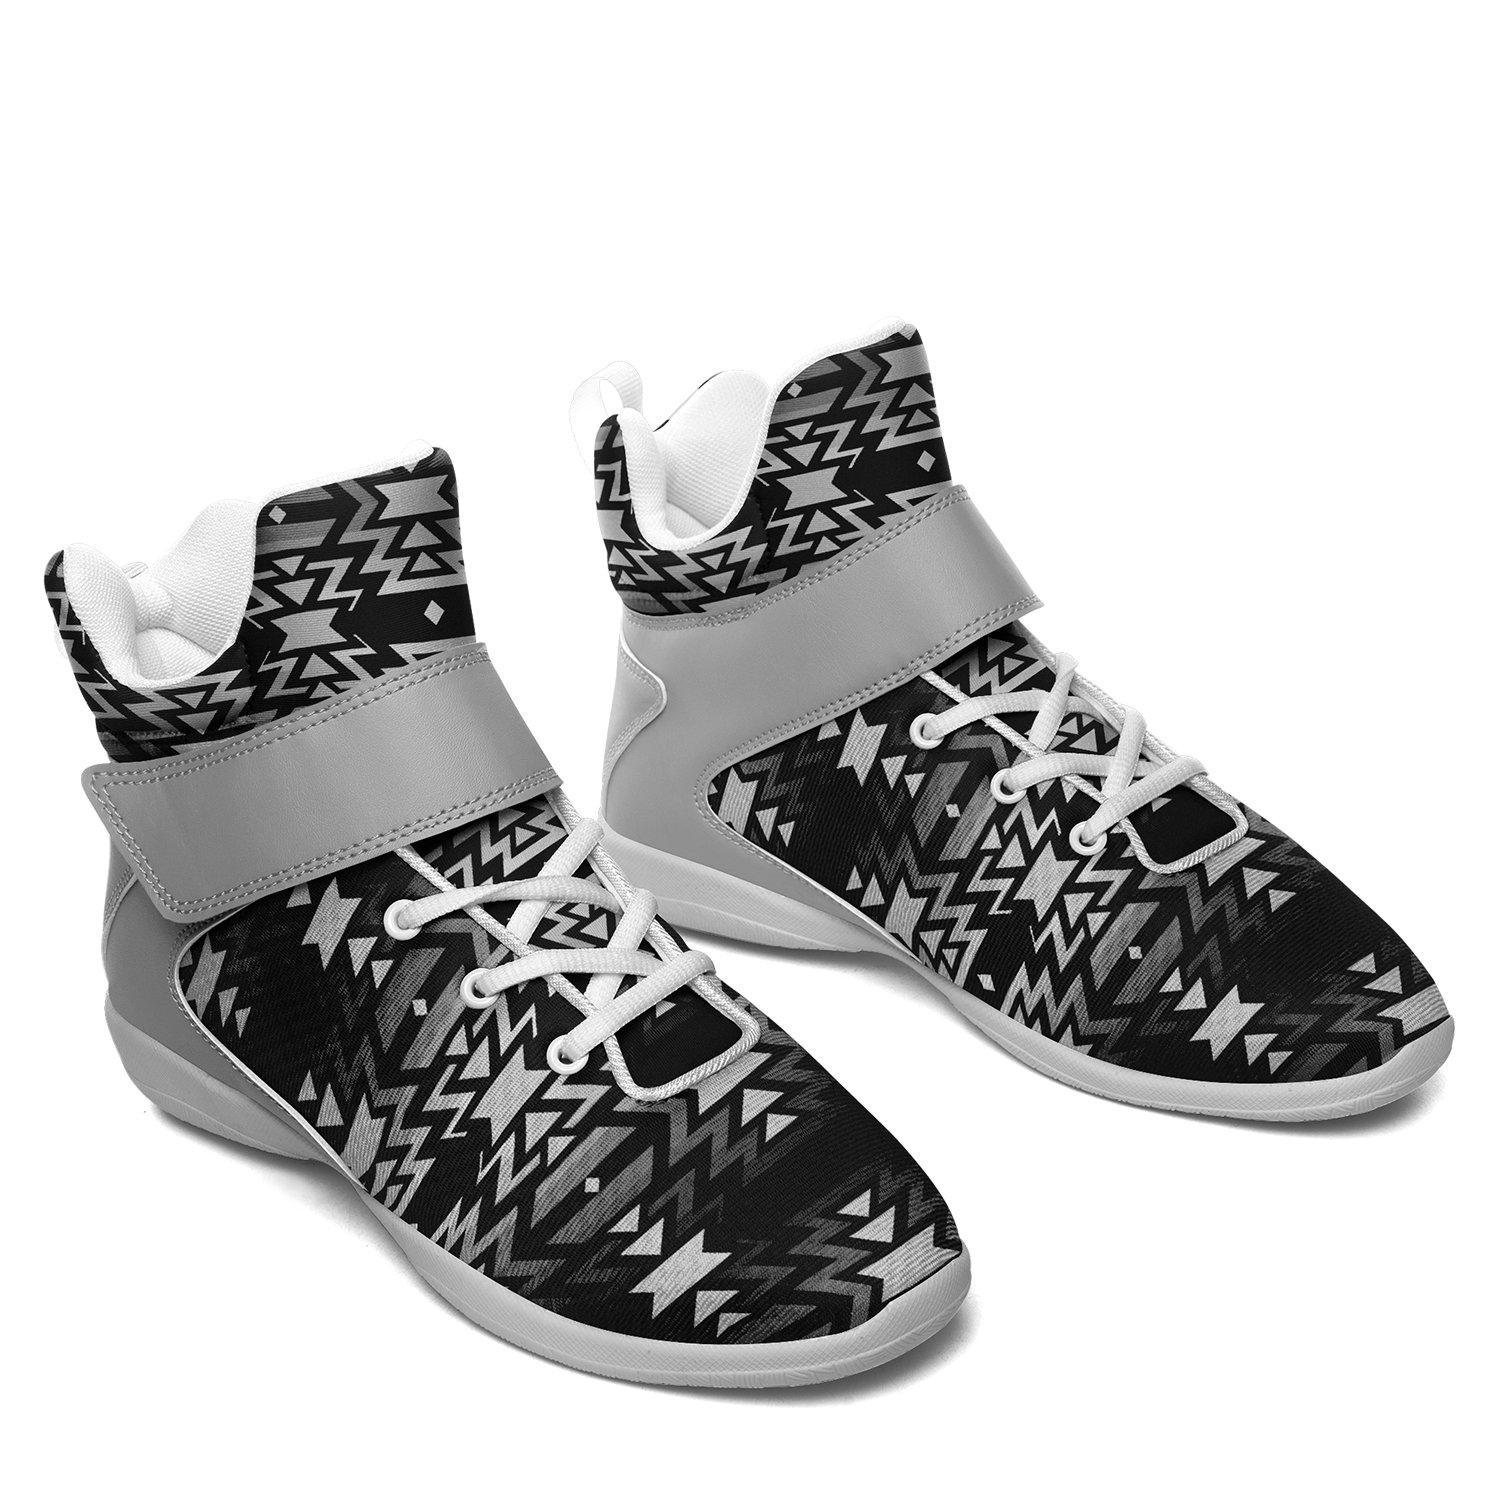 Black Fire Black and White Ipottaa Basketball / Sport High Top Shoes - White Sole 49 Dzine 